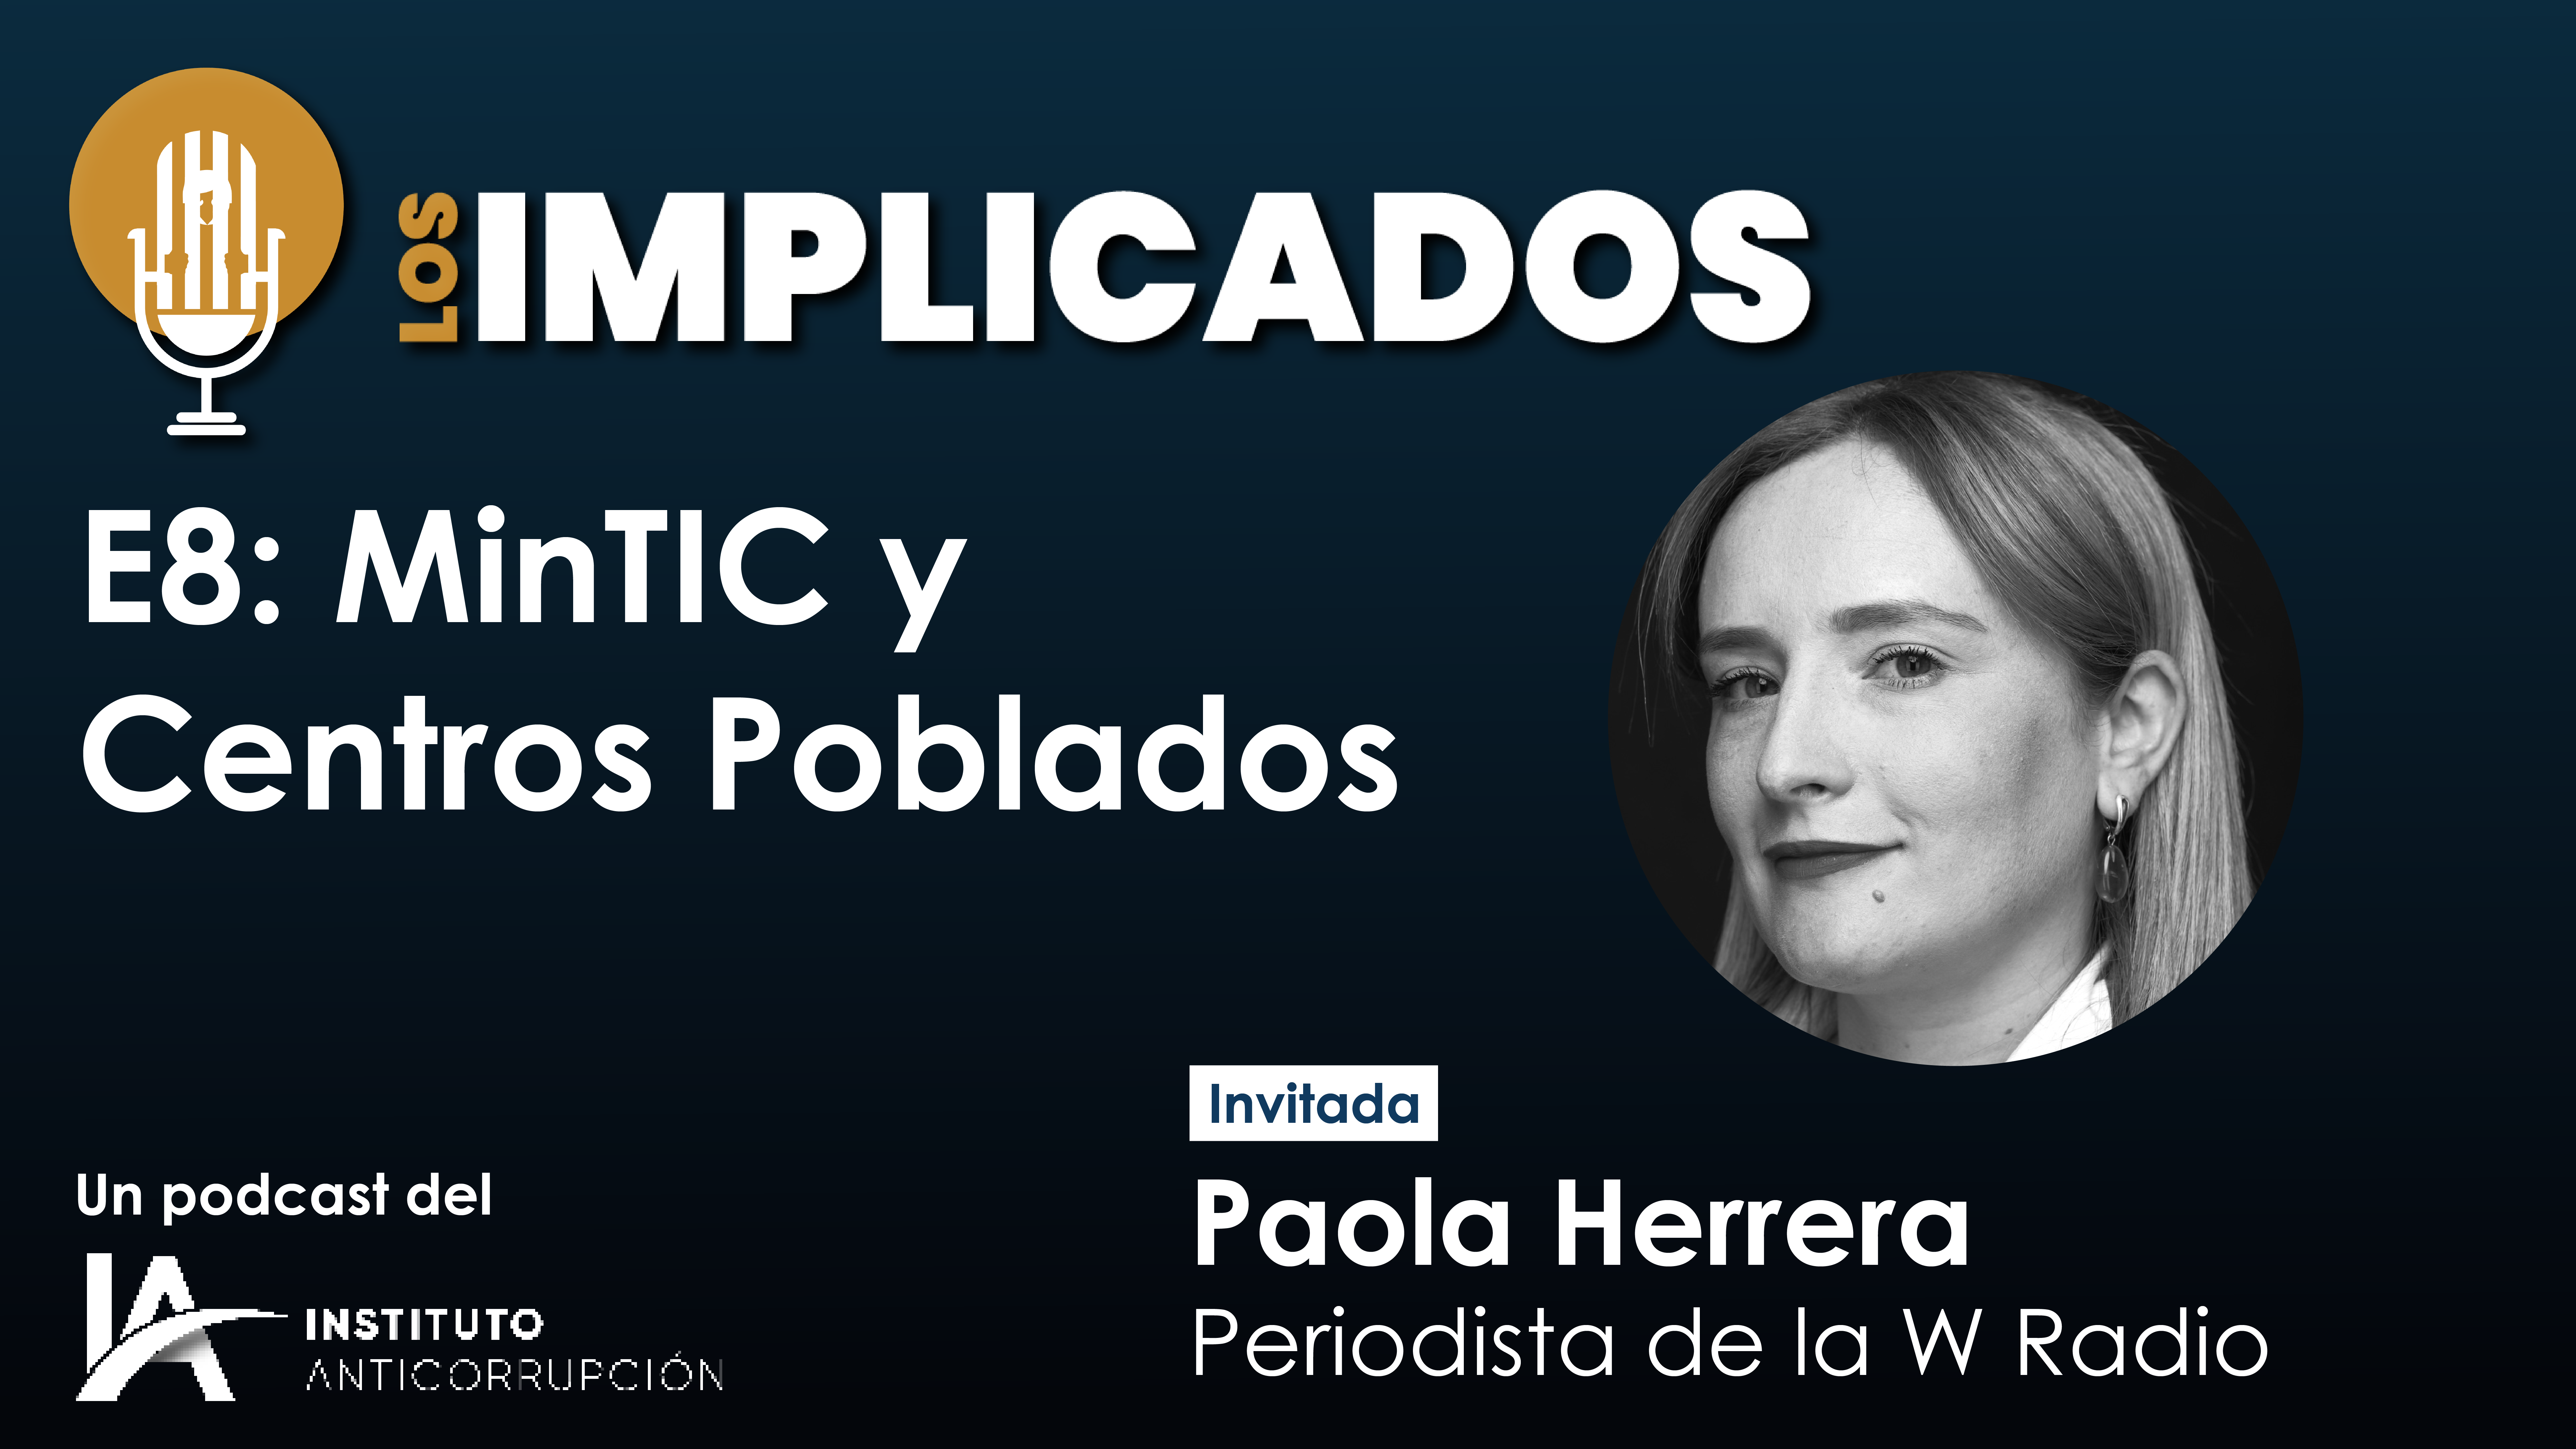 On Air | Information, Communication and Technology (ICT) Ministry and Centros Pobalados (Populated Centers) with Paola Herrera